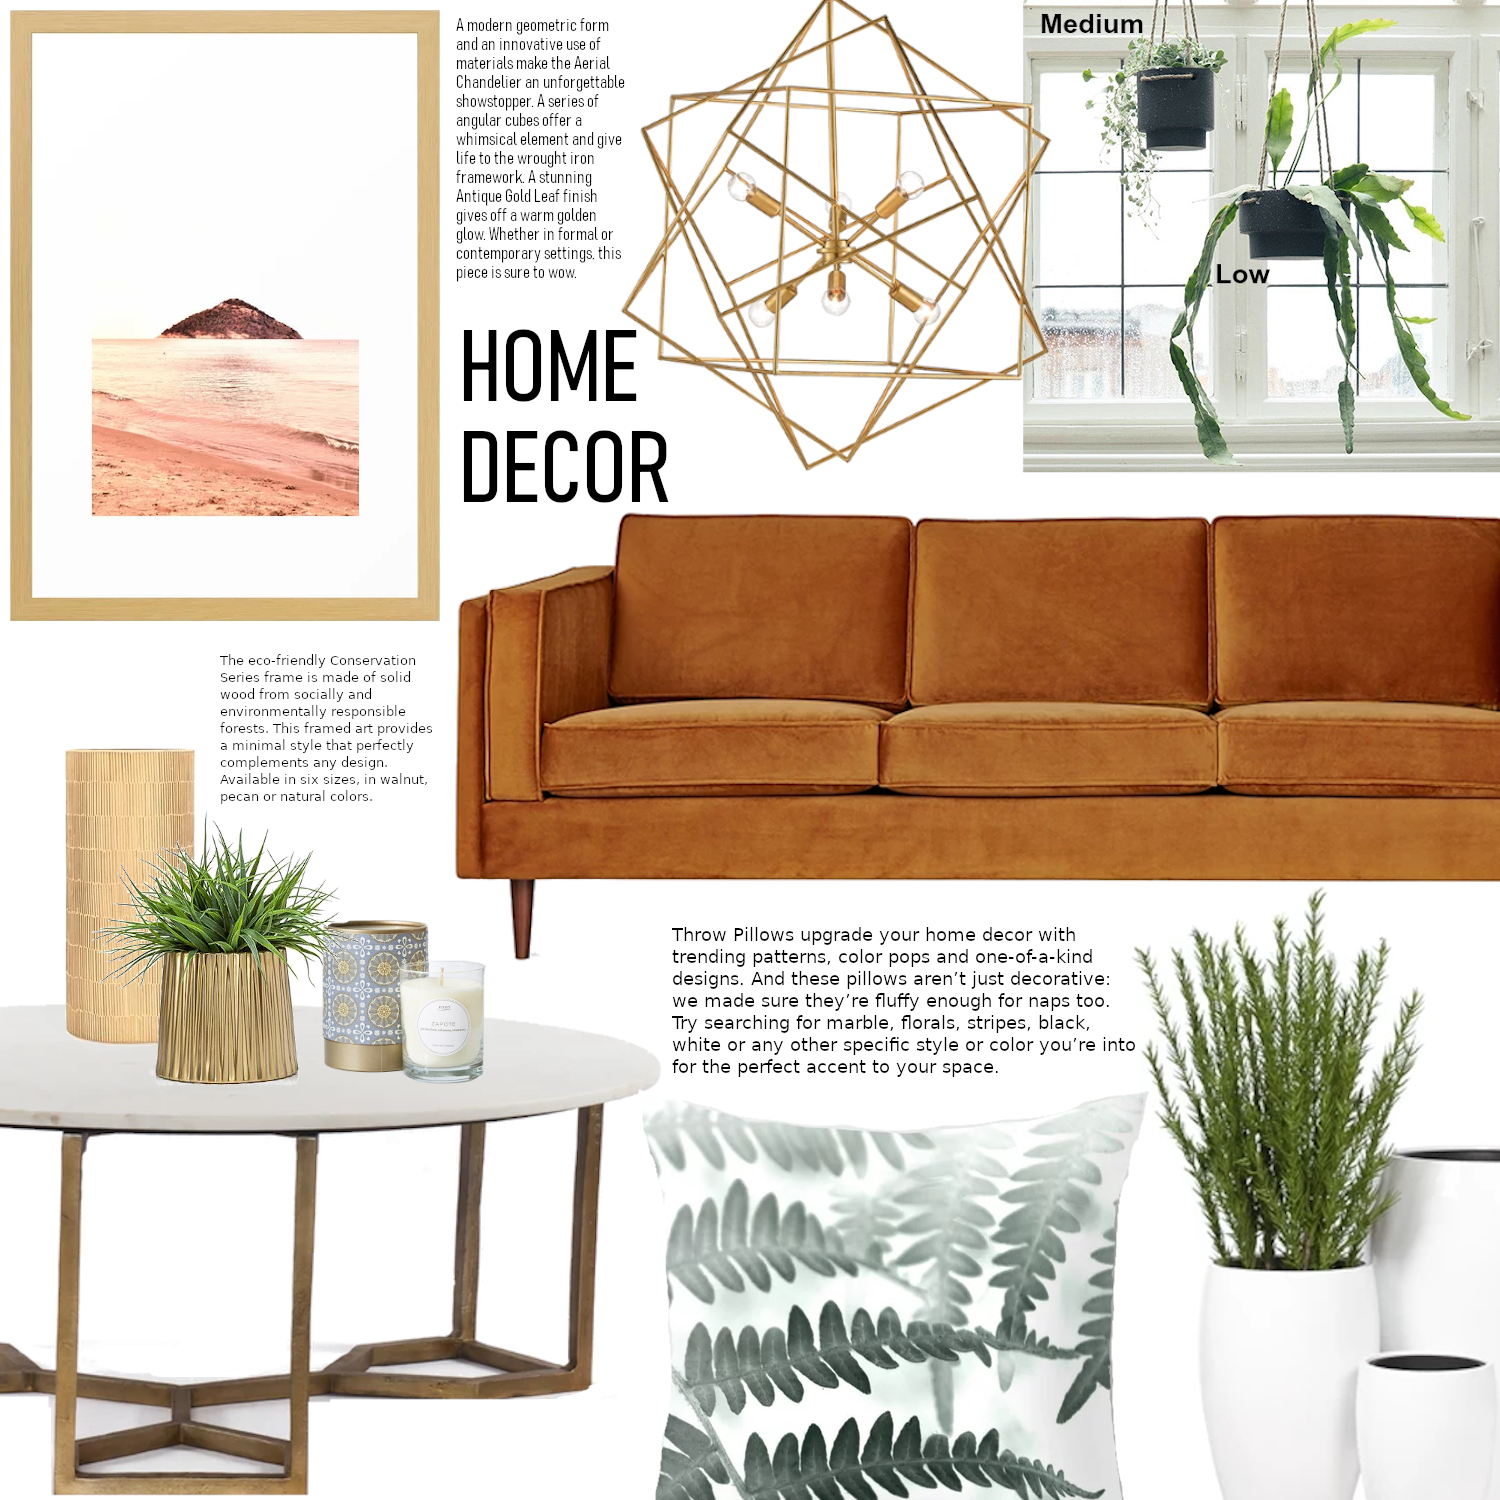 0807 Get the style Leather sofa vs greenery